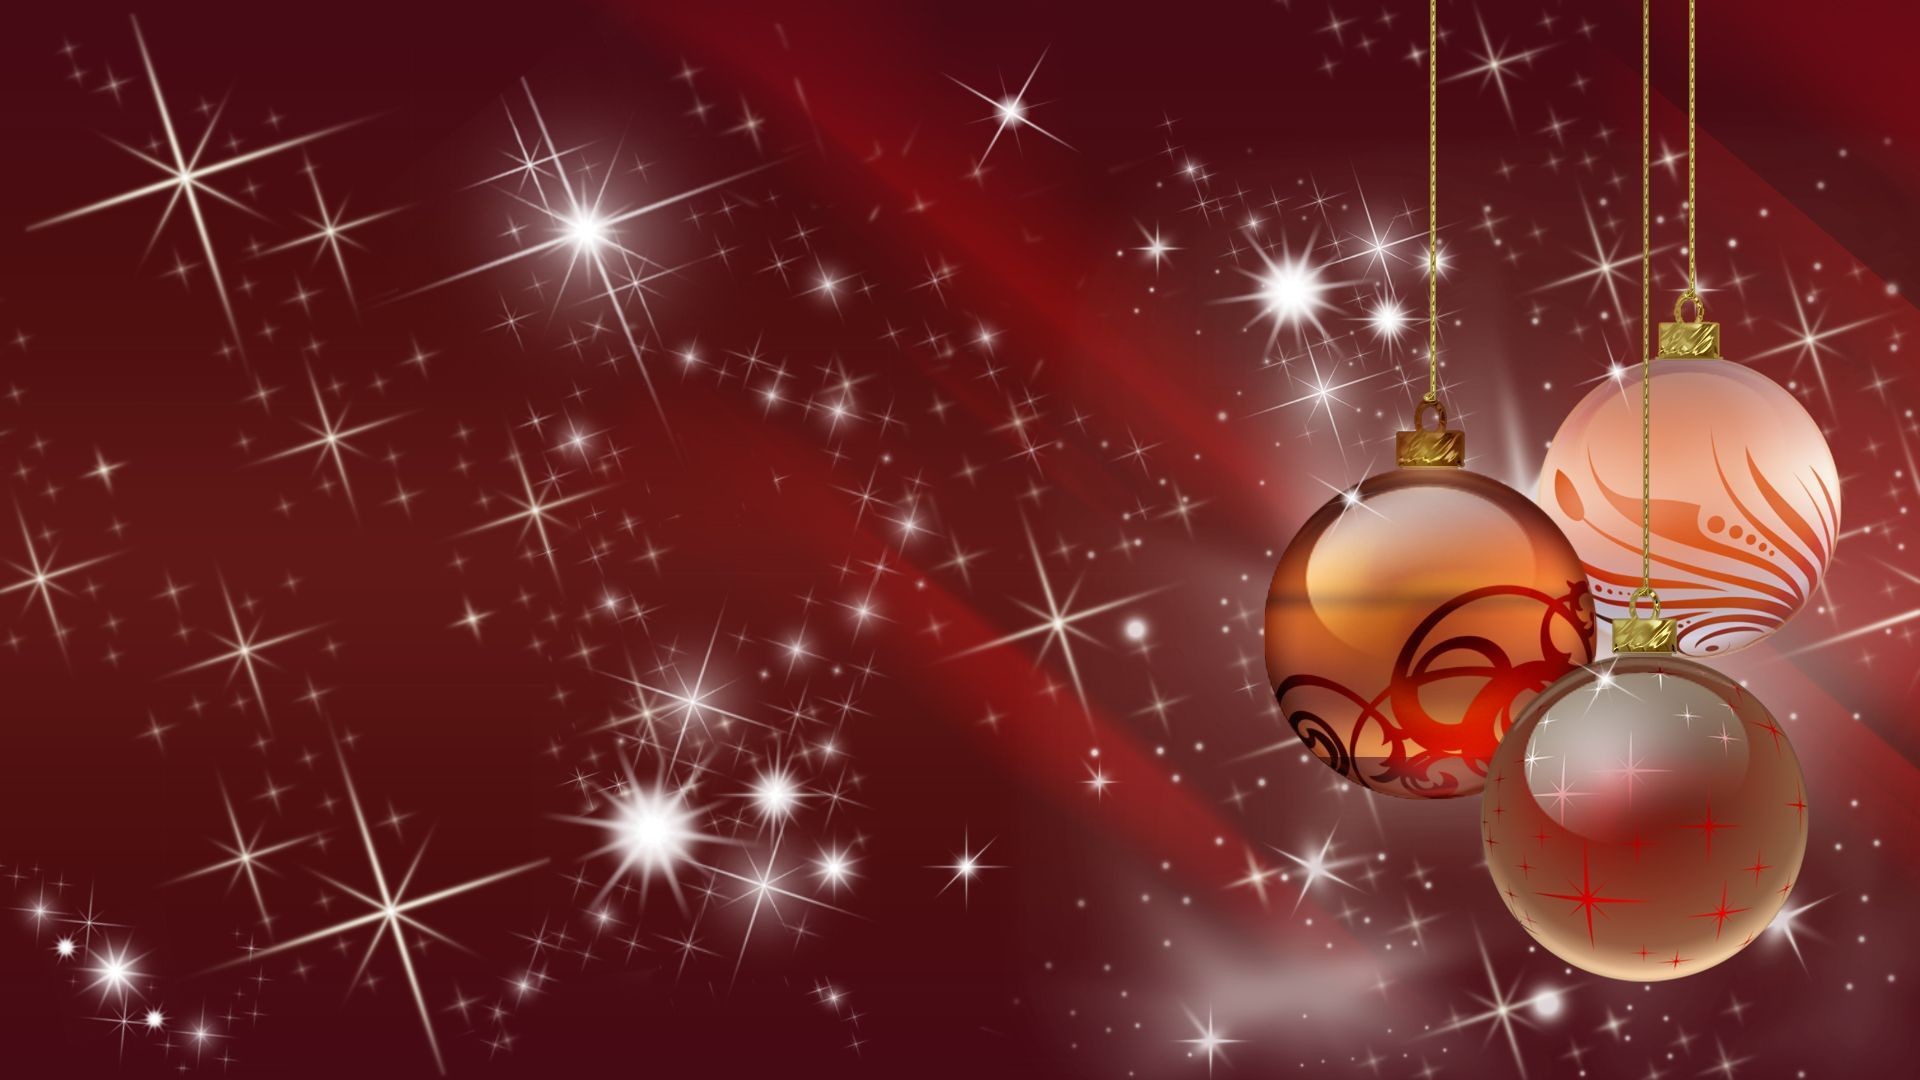 wallpapers and backgrounds,christmas ornament,space,sky,star,christmas eve